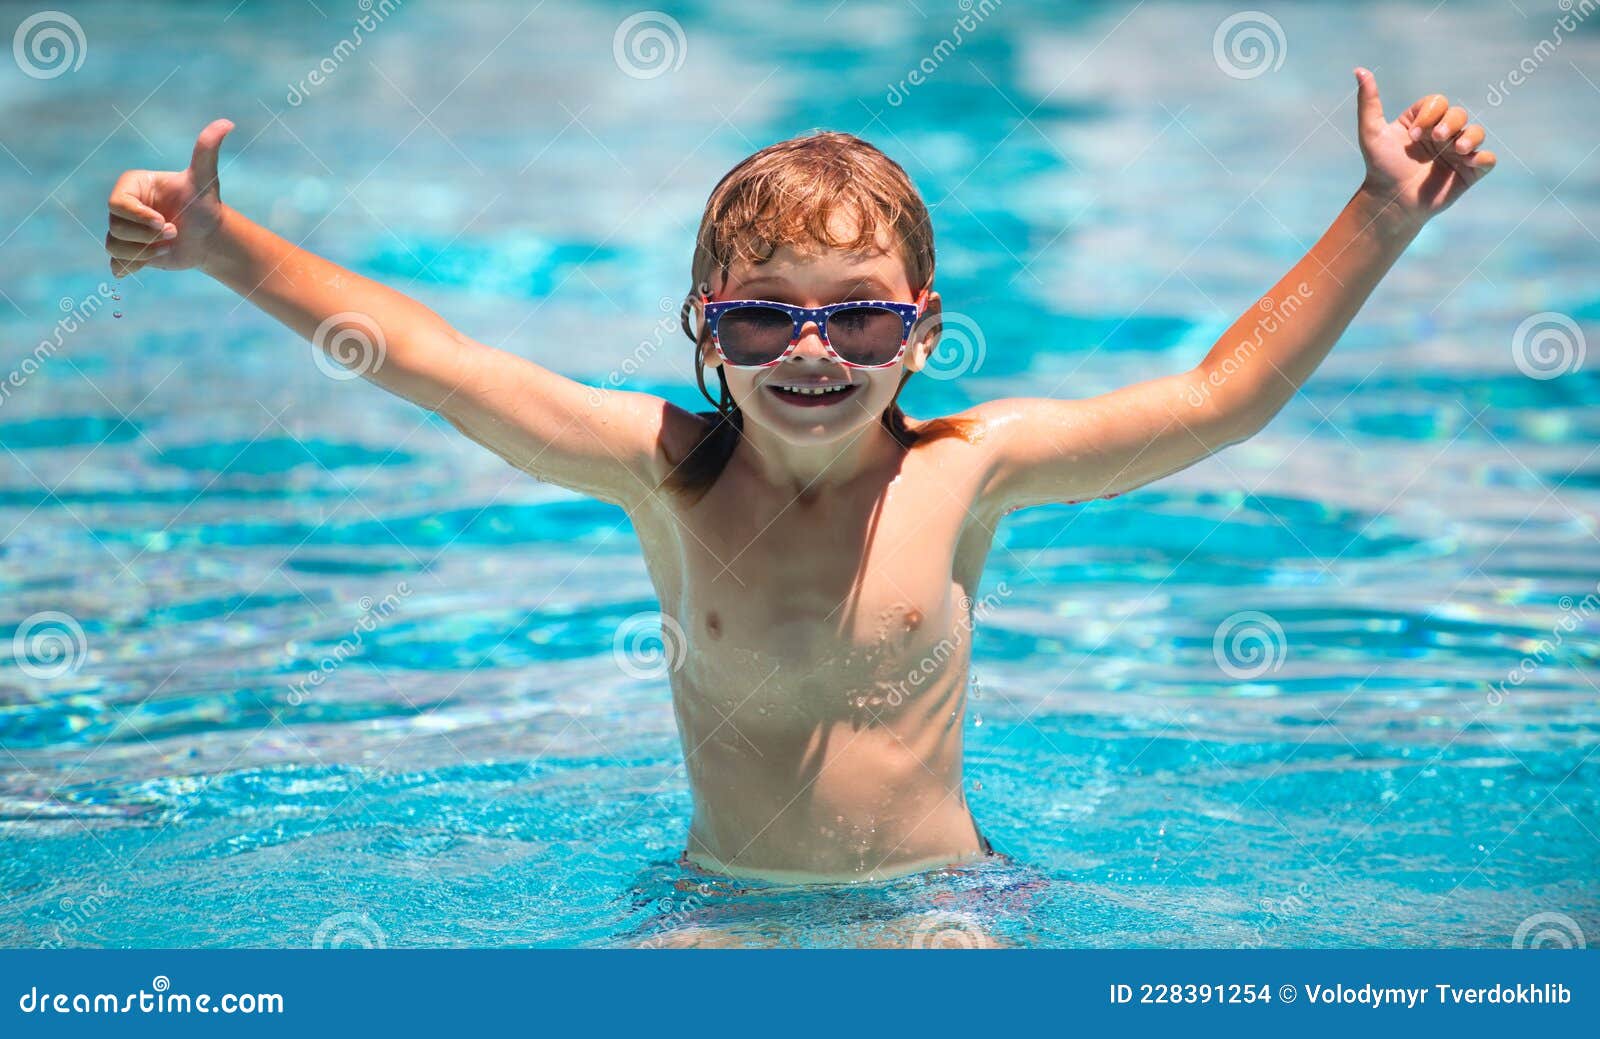 Cute Child Boy Swim in Swimming Pool, Summer Water Background with ...